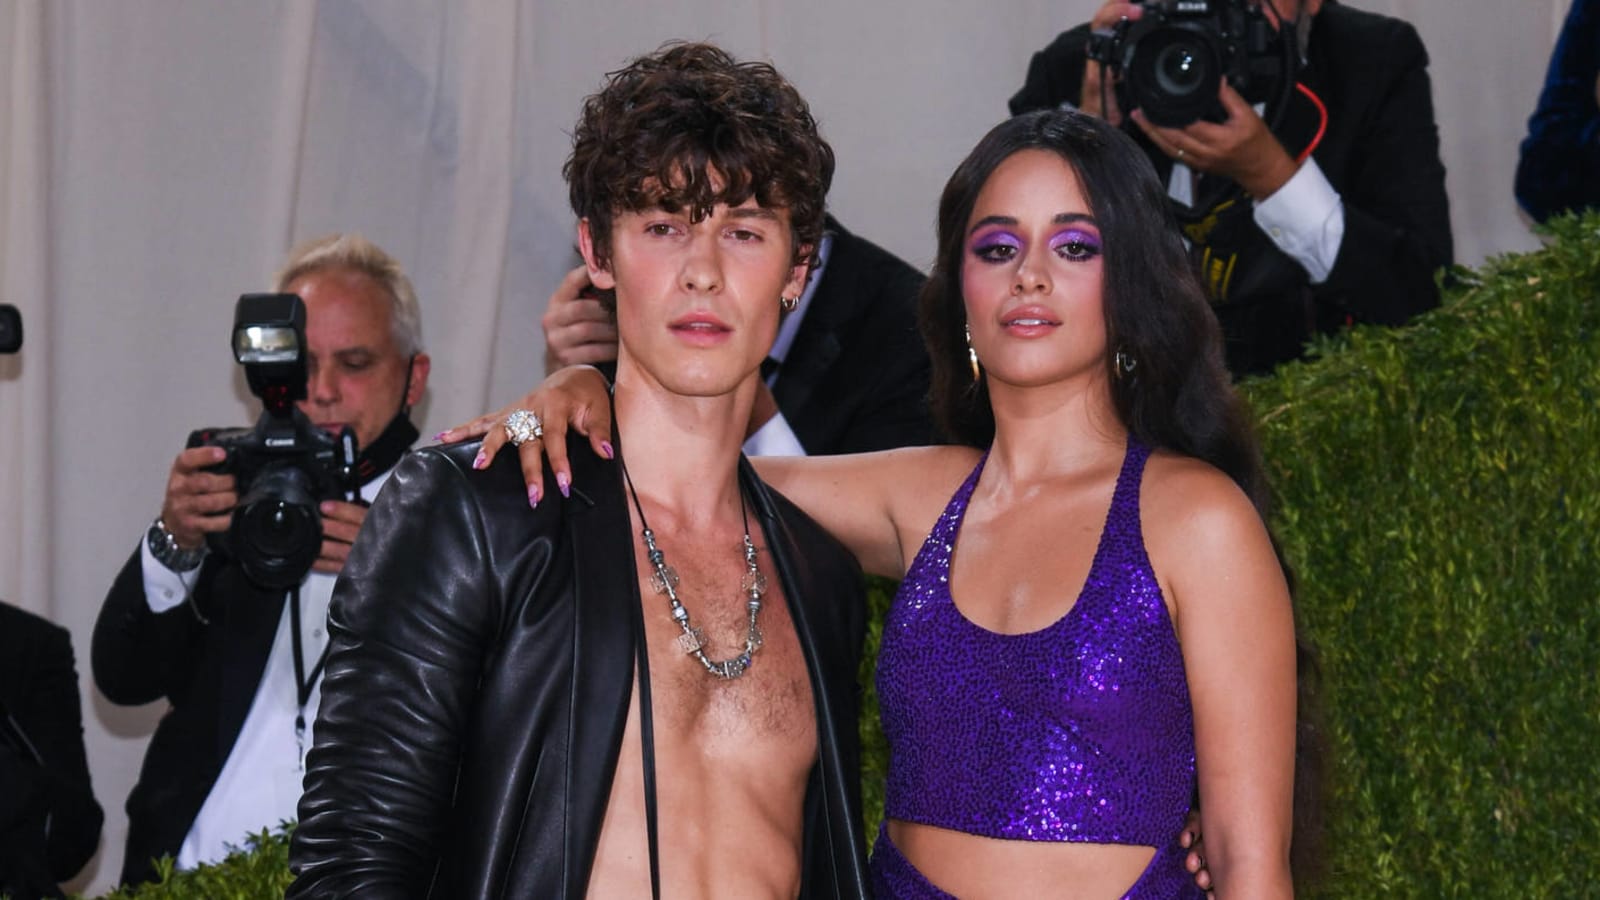 Camila Cabello and Shawn Mendes announce split but 'will continue to be best friends'